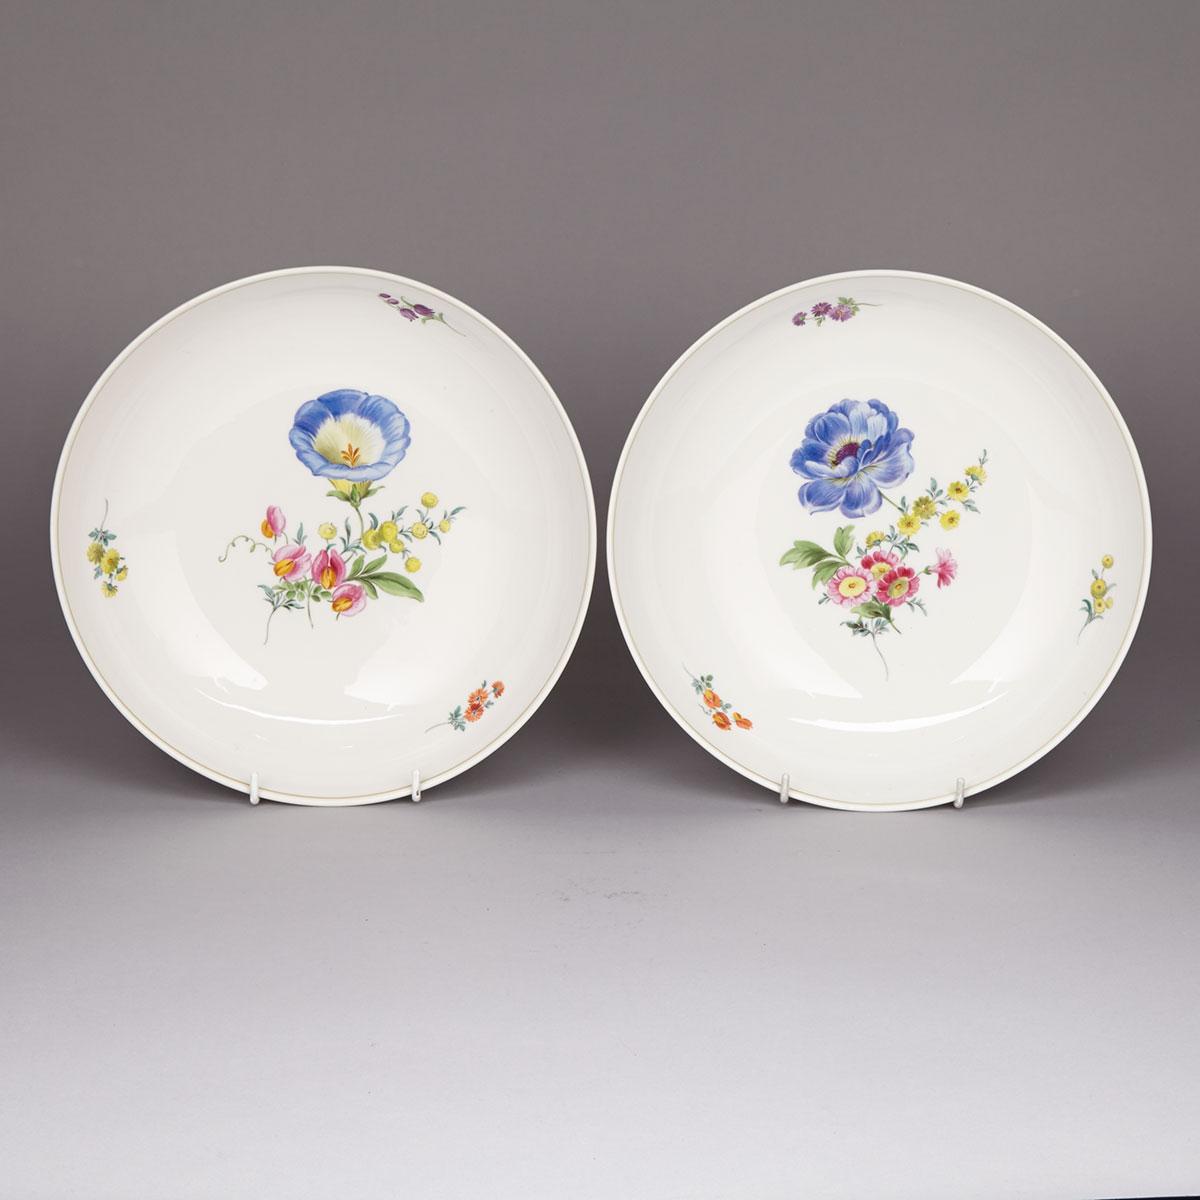 Pair of Meissen Shallow Bowls, 20th century